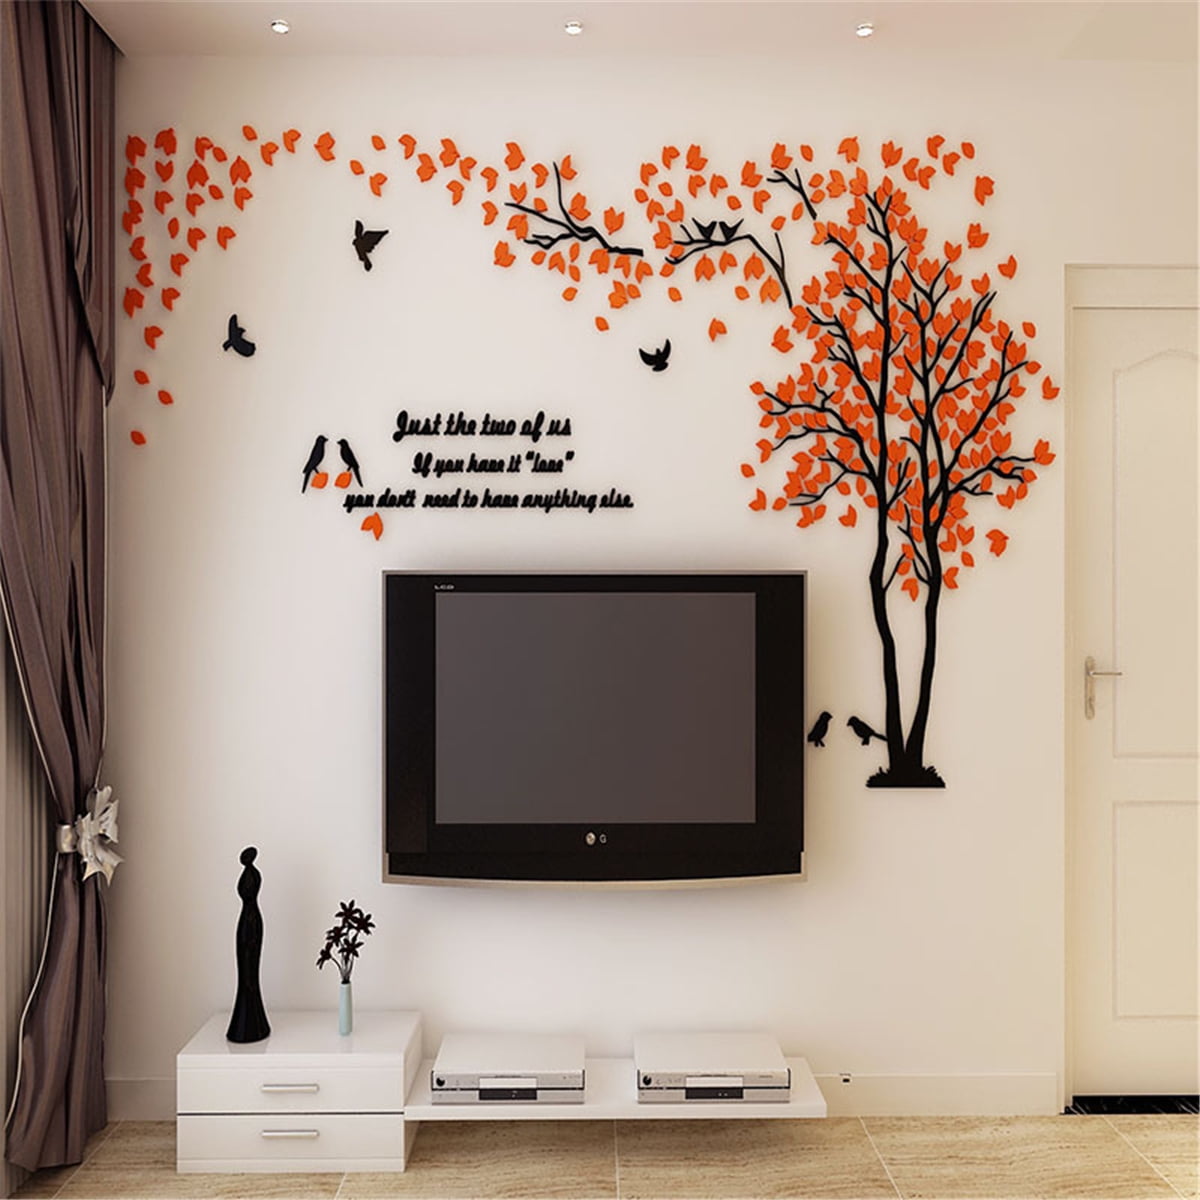 Large Tree Arcylic Wall 3D Sticker Living Room Decal Mural Art DIY Home TV Decor 